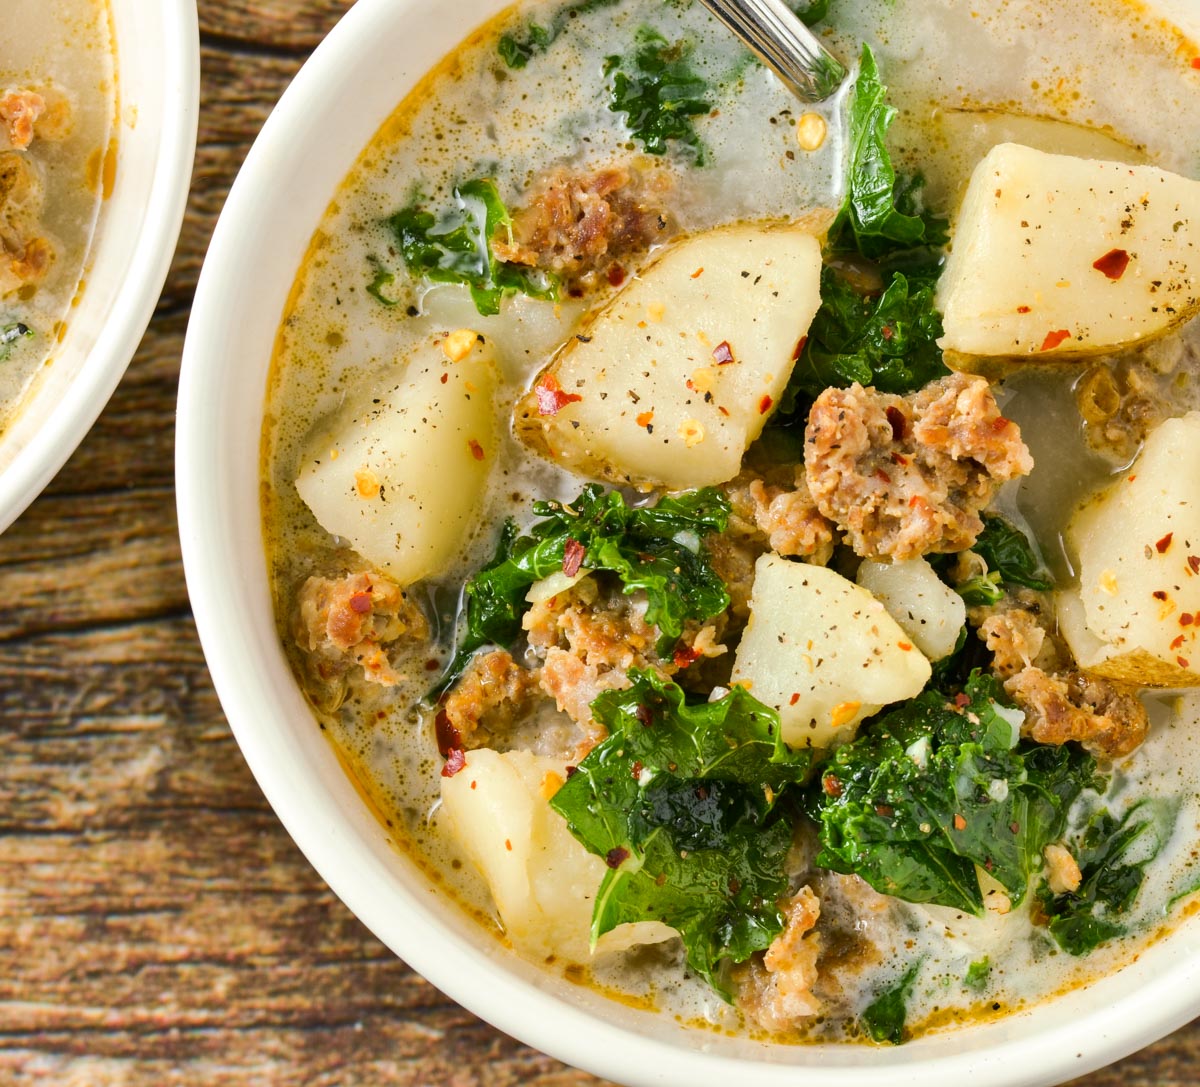 https://mamashire.com/wp-content/uploads/Instant-Pot-Zuppa-Toscana-Dairy-Free-Square-1.jpg